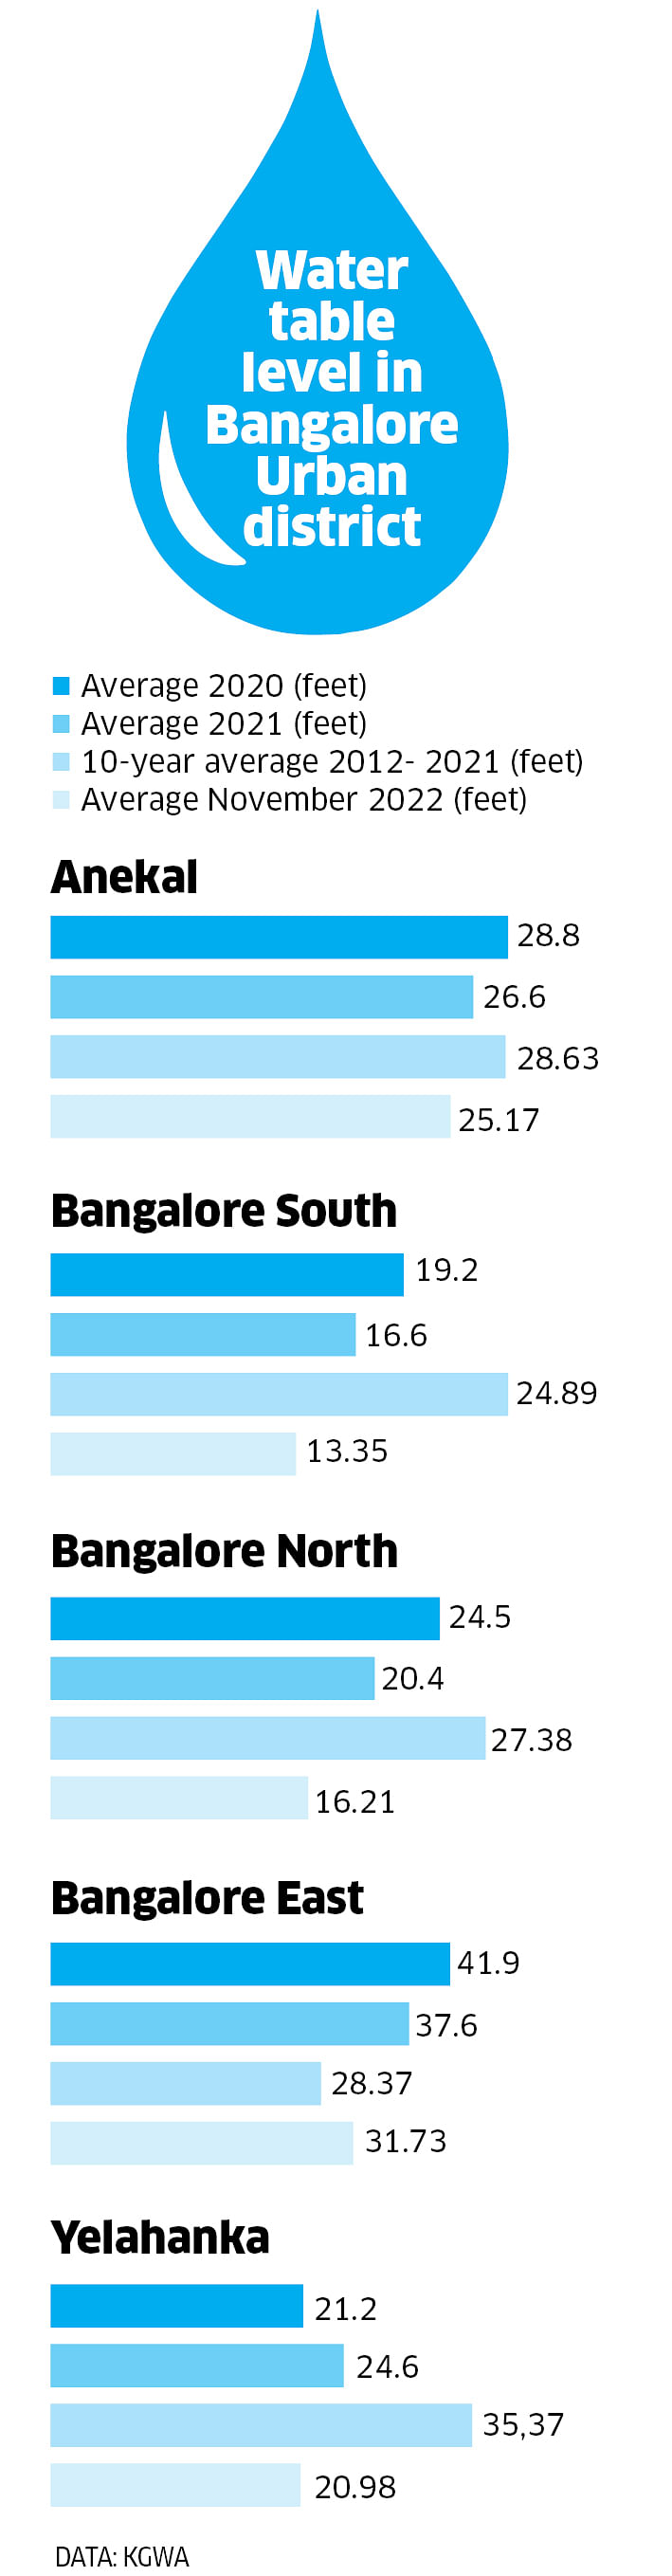 Water levels in Bangalore Urban district